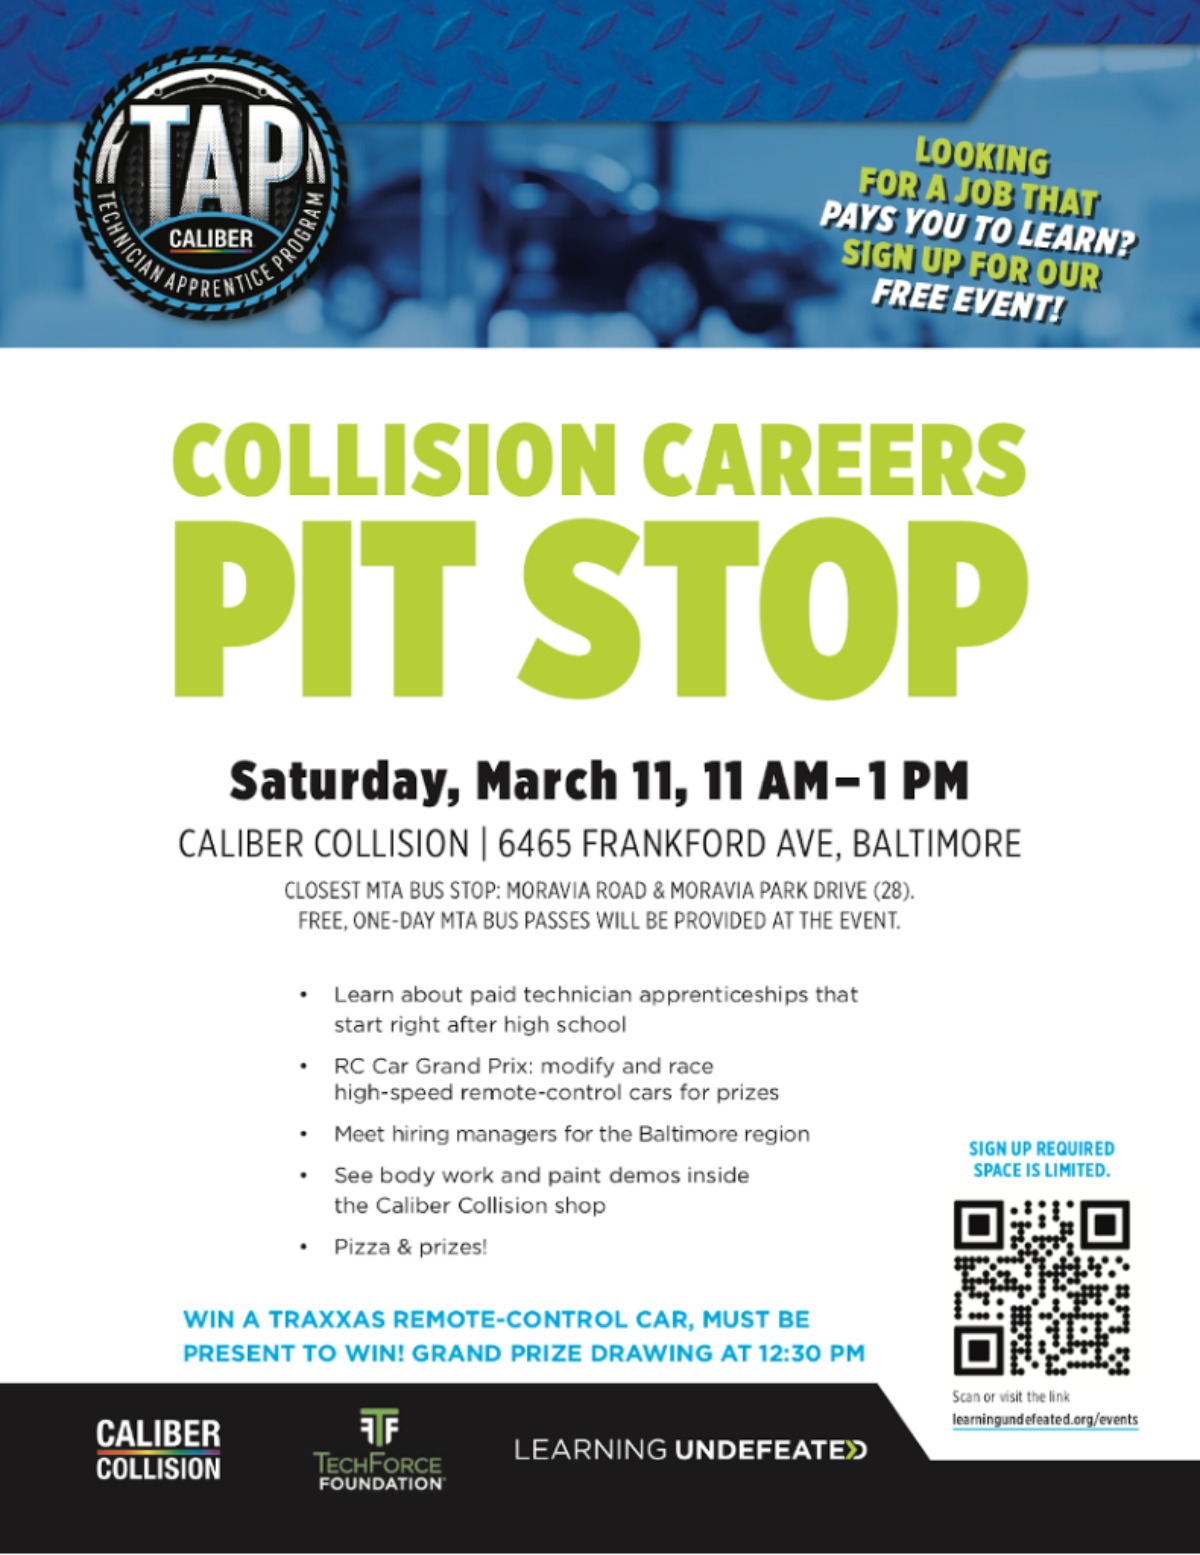 Learning Undefeated's Free Automobile Apprenticeship Event with Caliber Collision